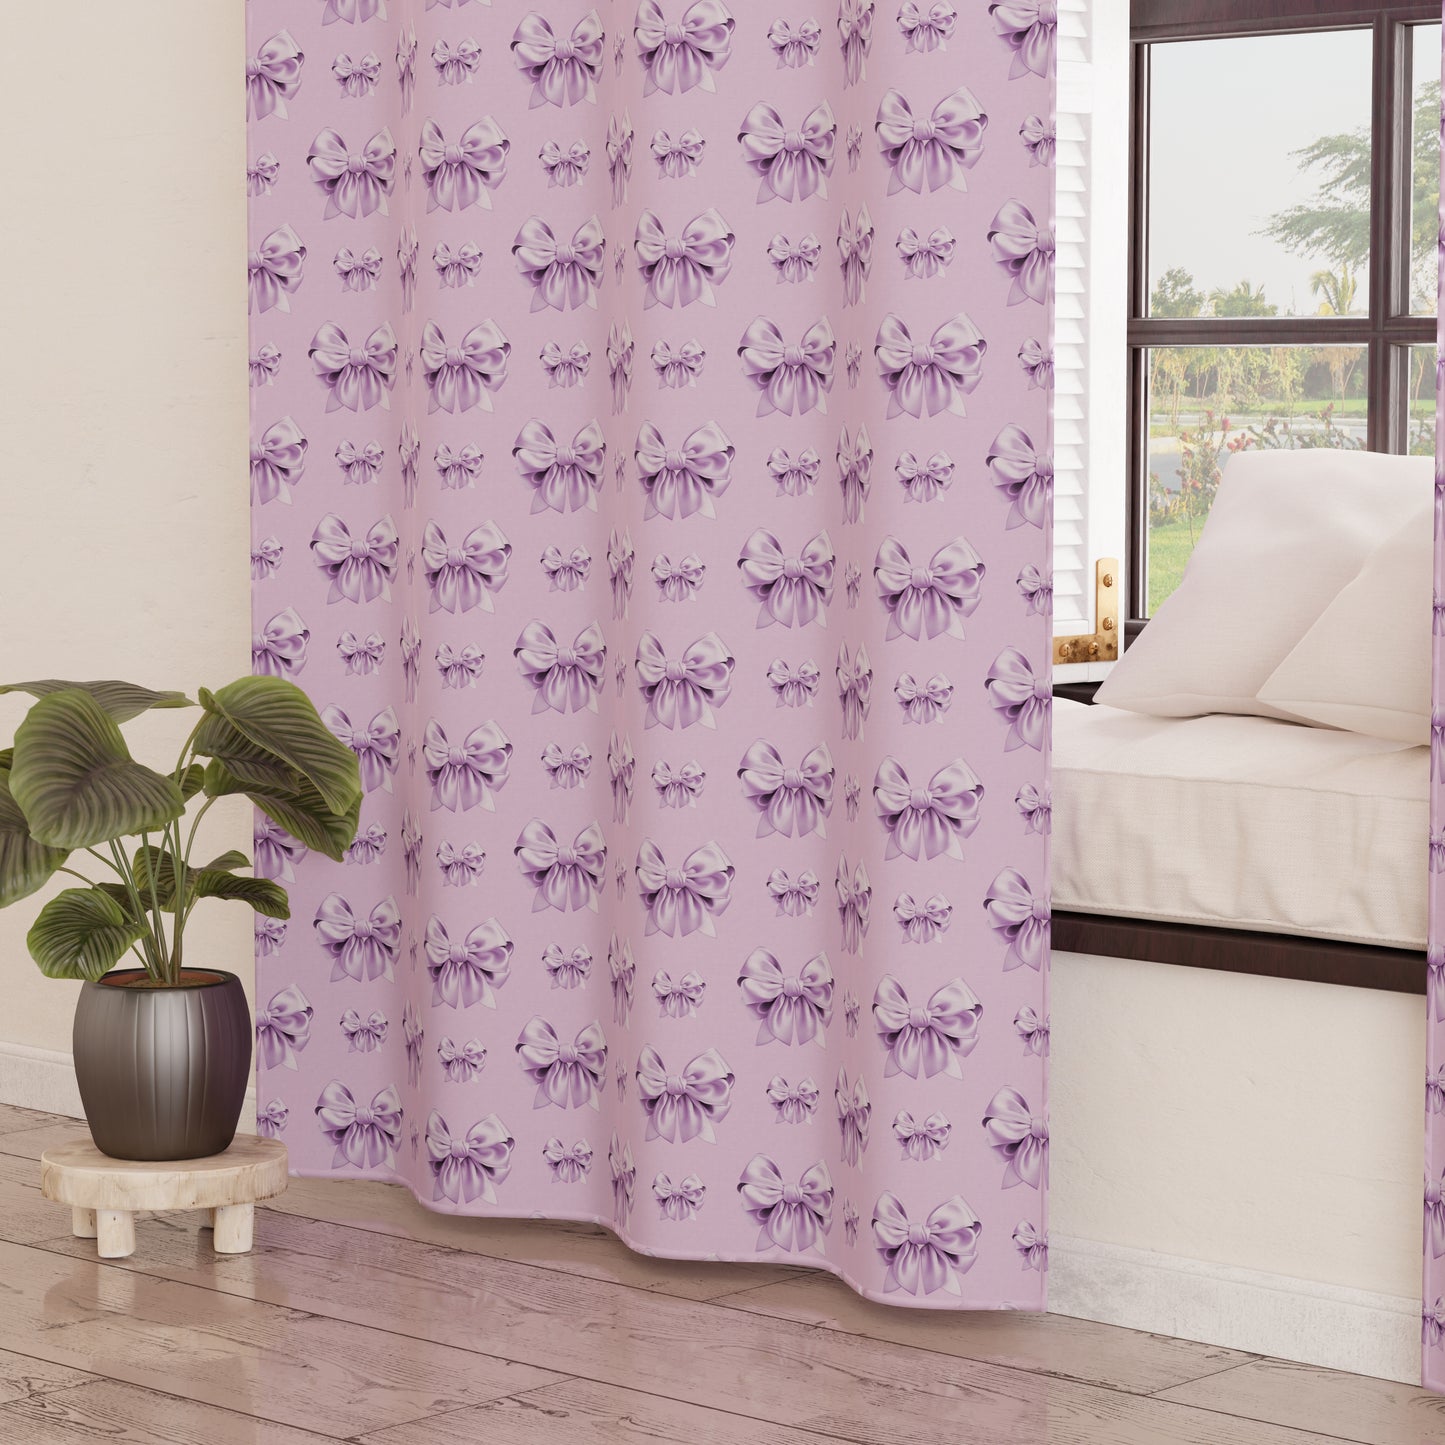 Indoor Furnishing Curtain Panels with Lilac Bow Rings